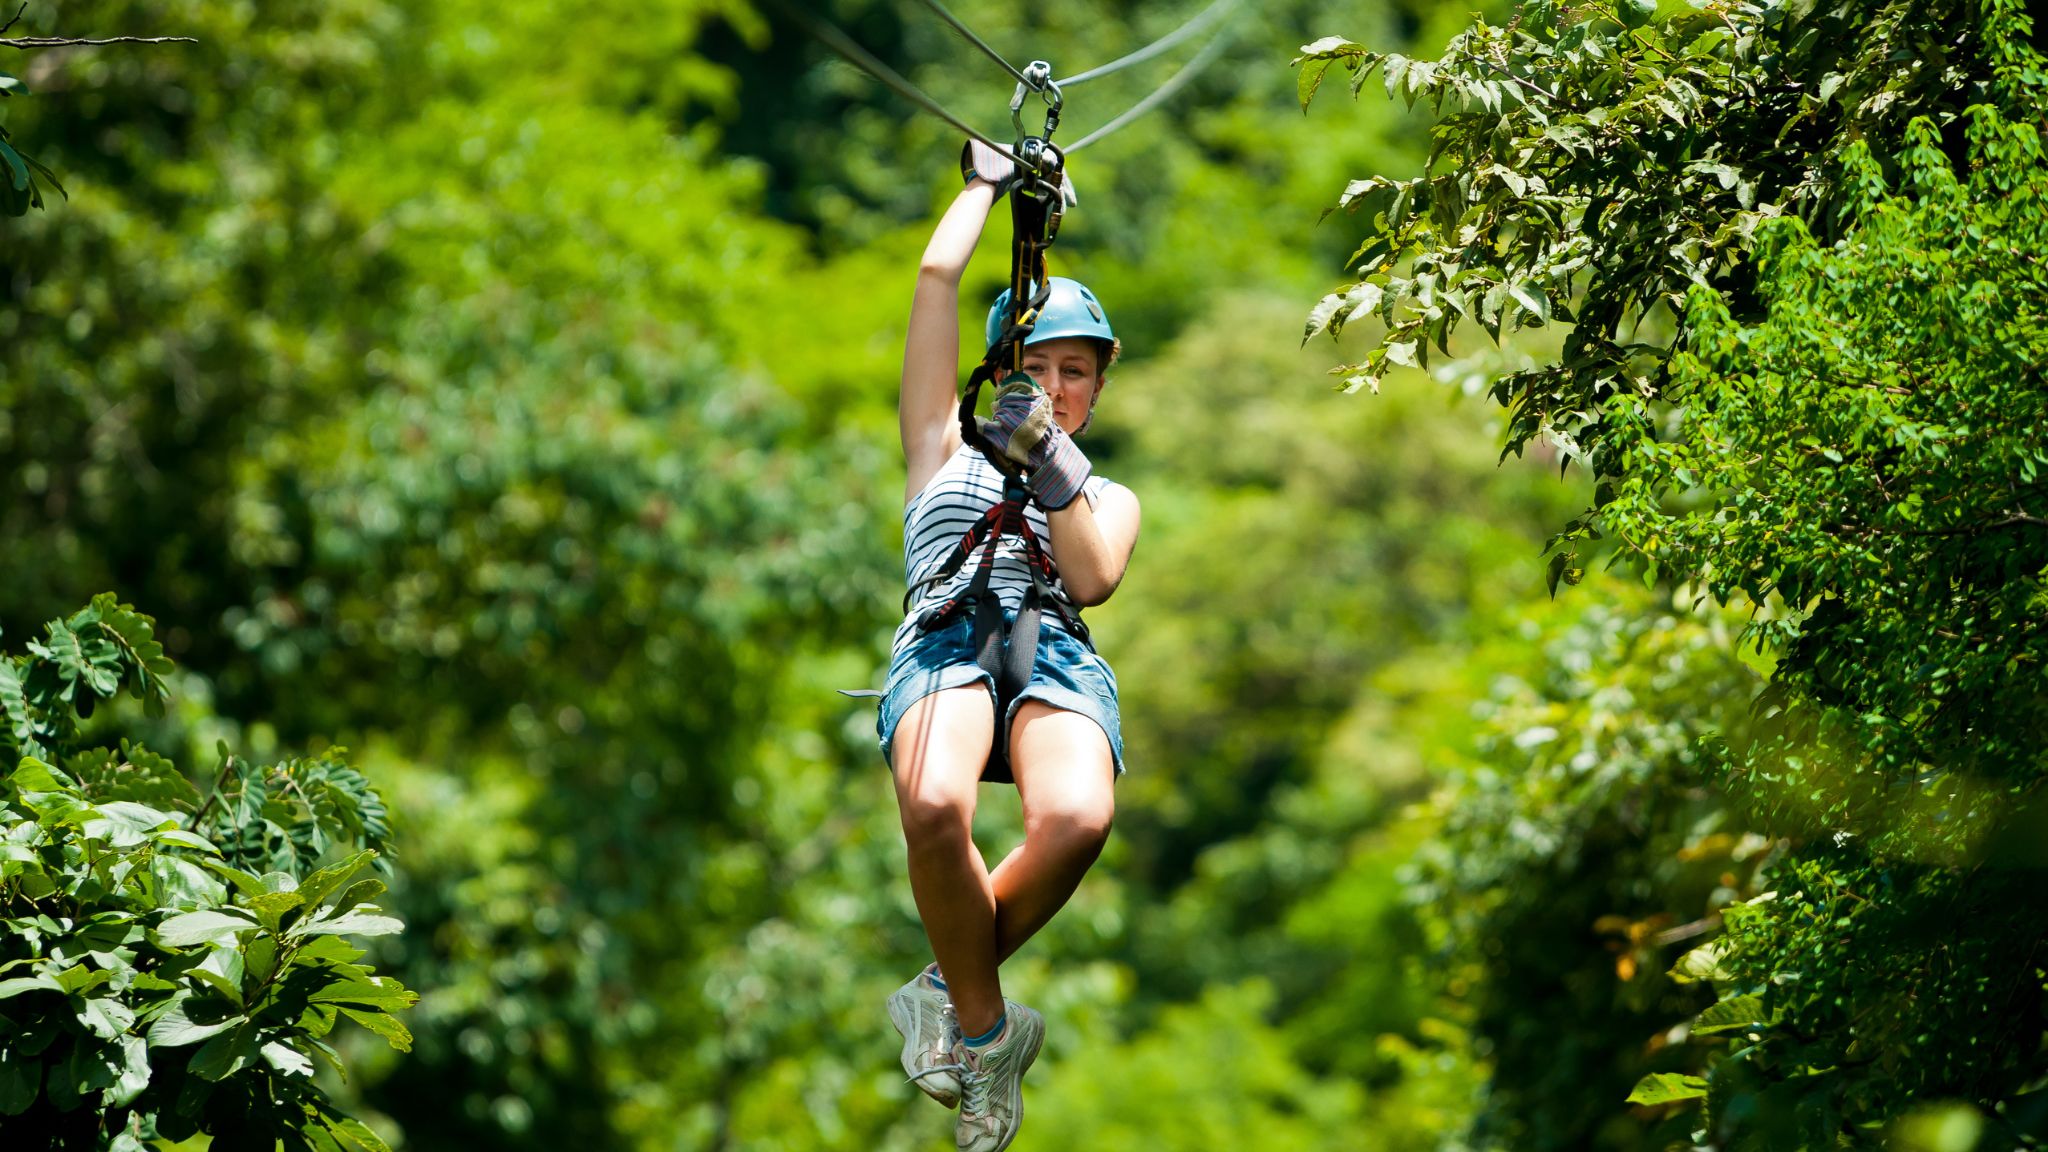 Day 2 Going For Ziplining Adventure To Explore Nahm Dong Park